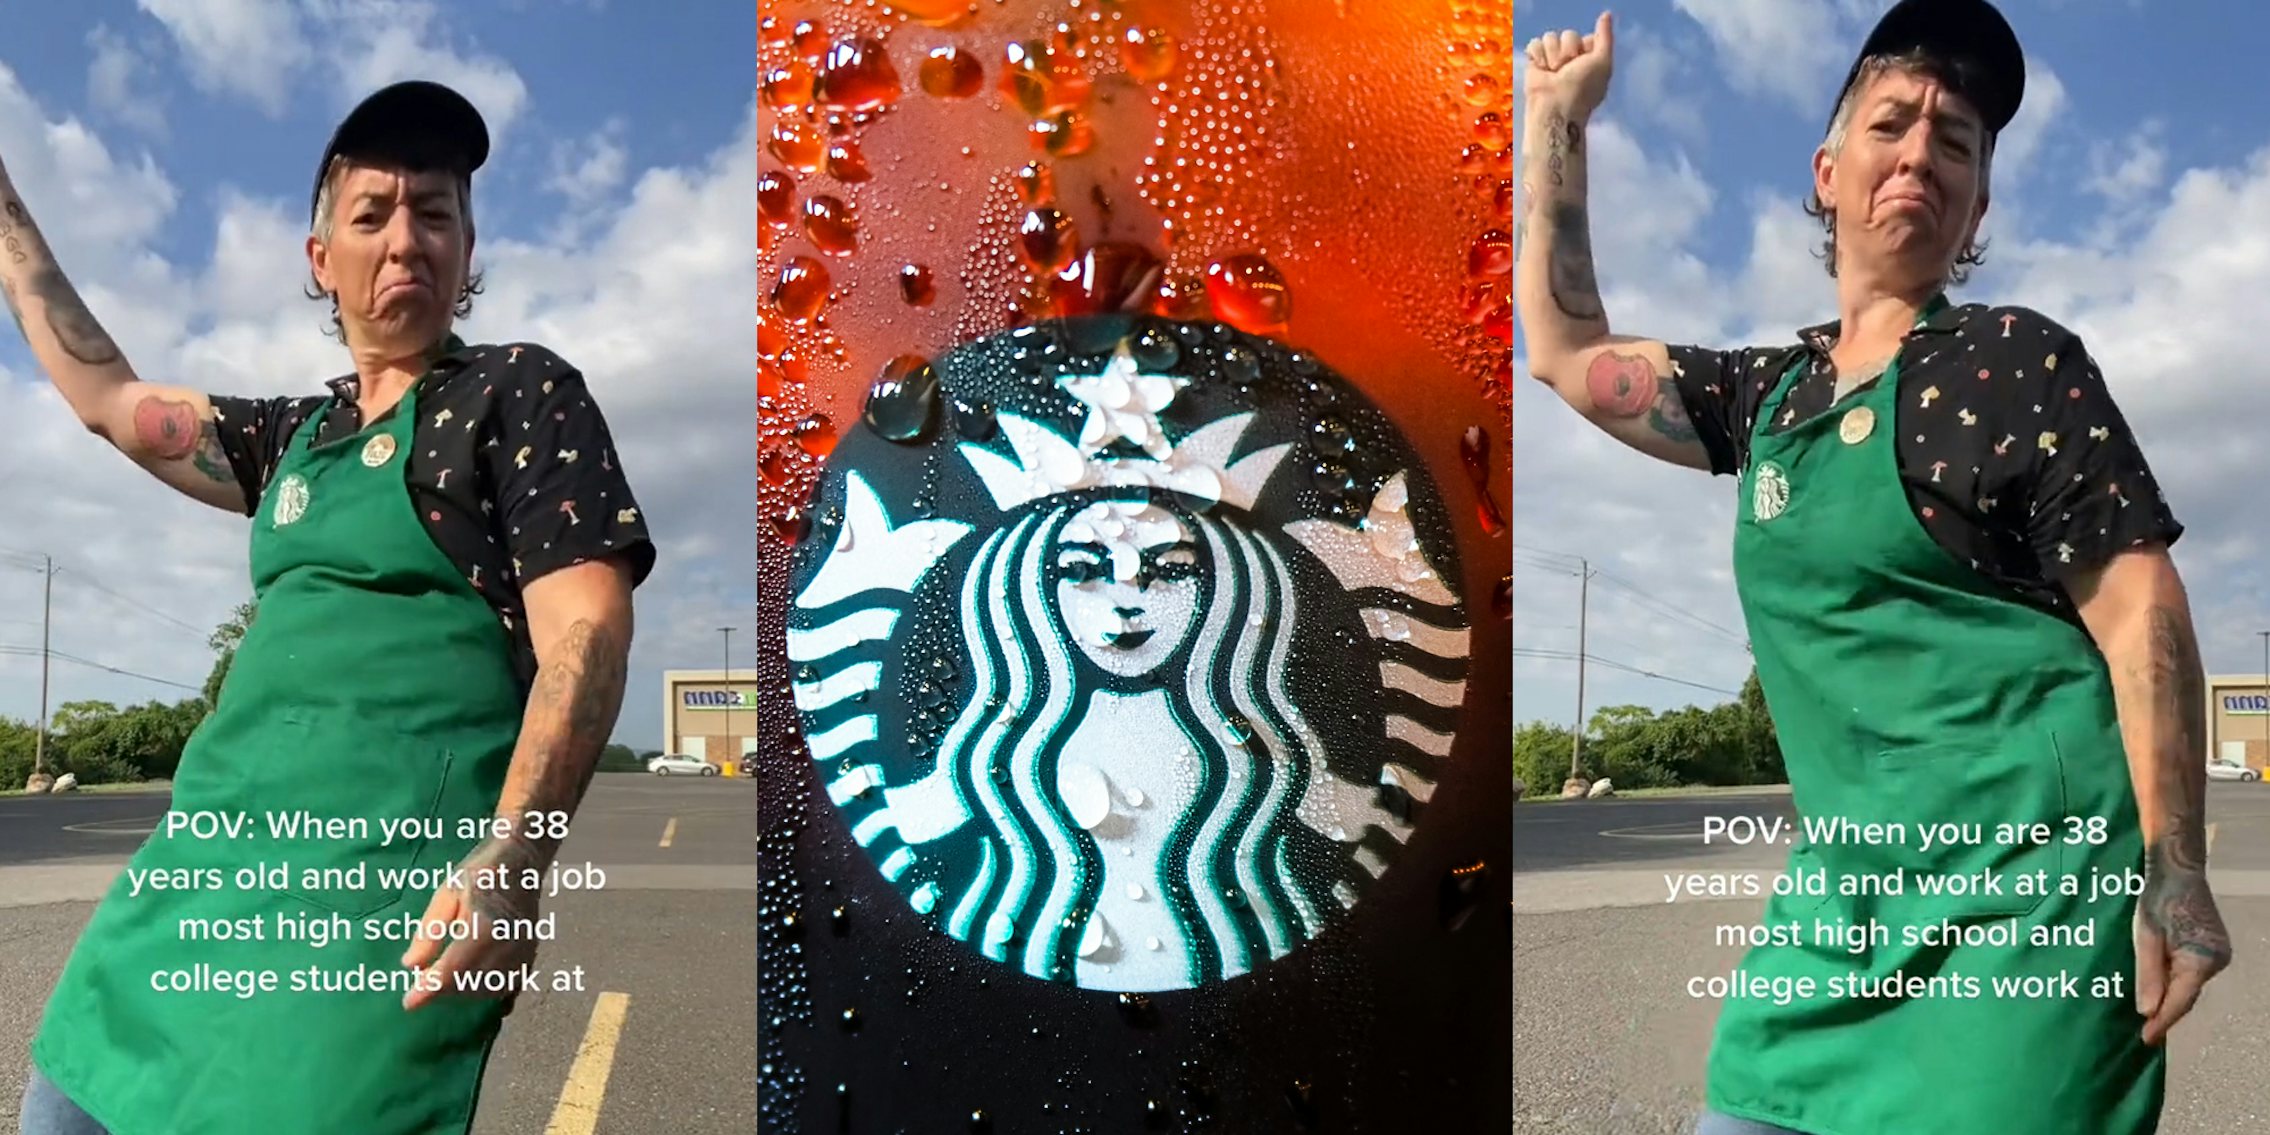 Starbucks employee dancing in parking lot caption 'POV: When you are 38 years old and work at a job most high school students work at' (l) Starbucks cup with condensation up close (c) Starbucks employee dancing in parking lot caption 'POV: When you are 38 years old and work at a job most high school students work at' (r)